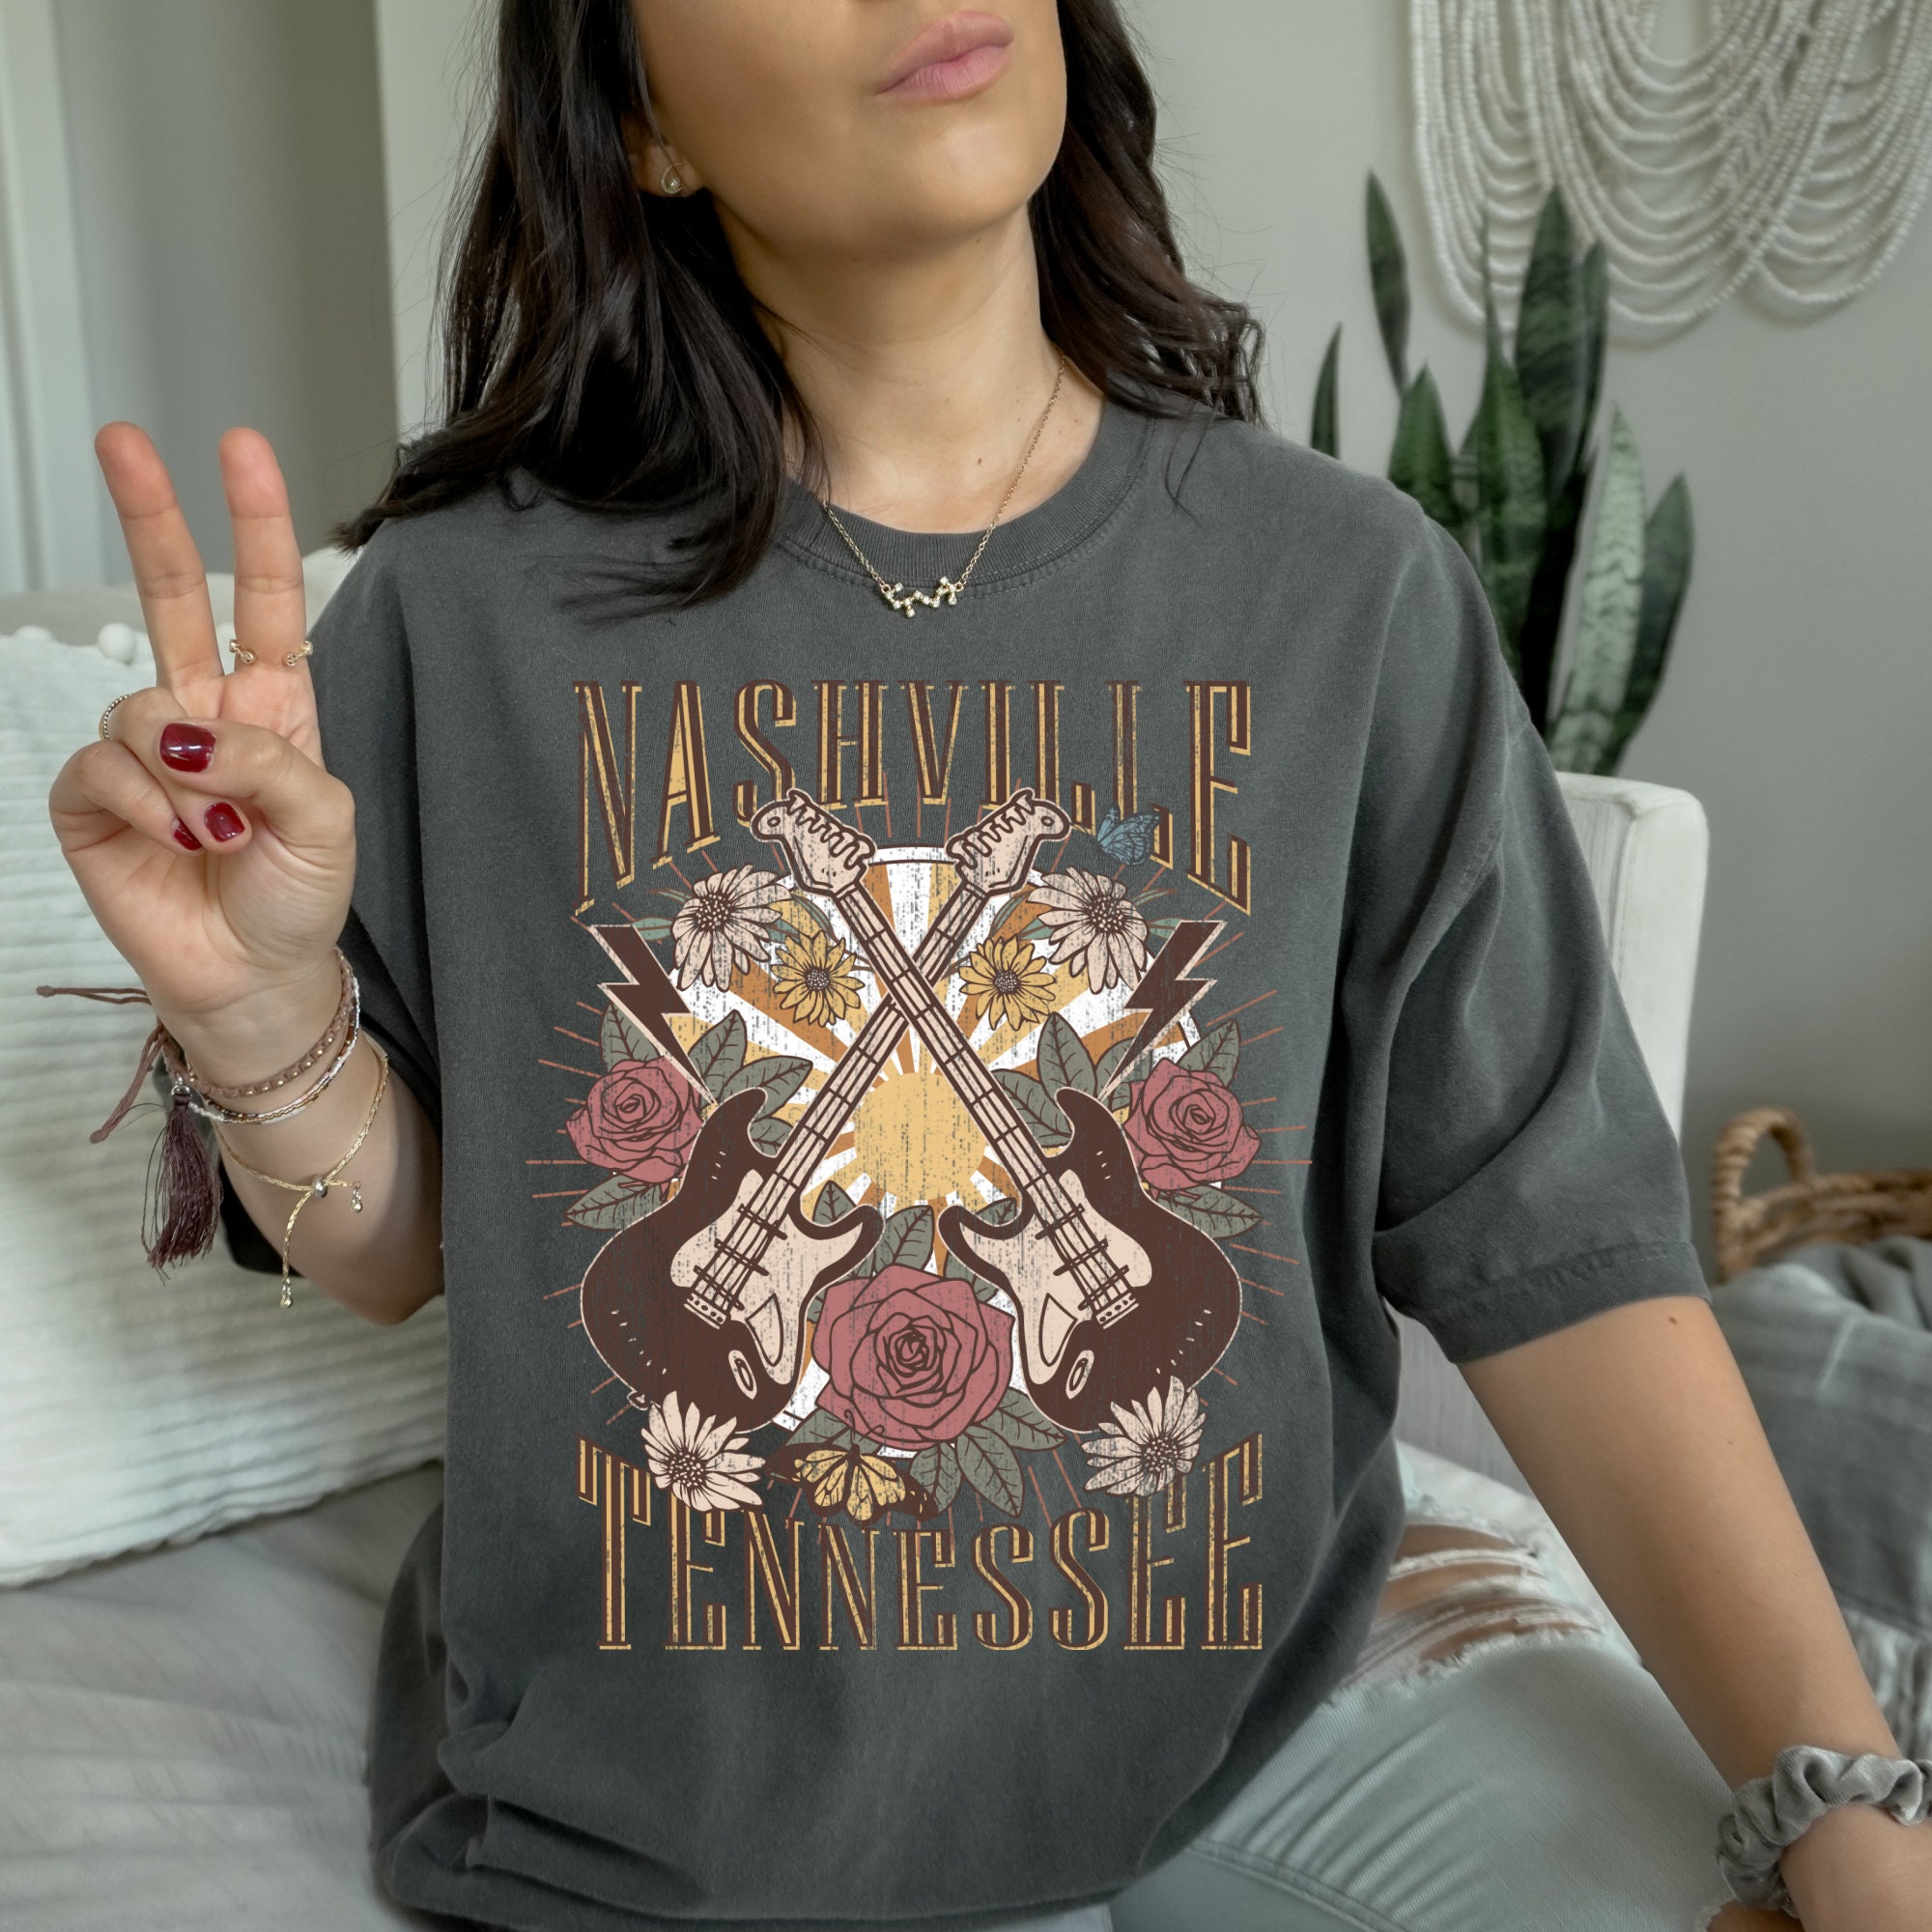 Discover Nashville Tennessee T-Shirt, Color Comfort Rock and Roll T-Shirt